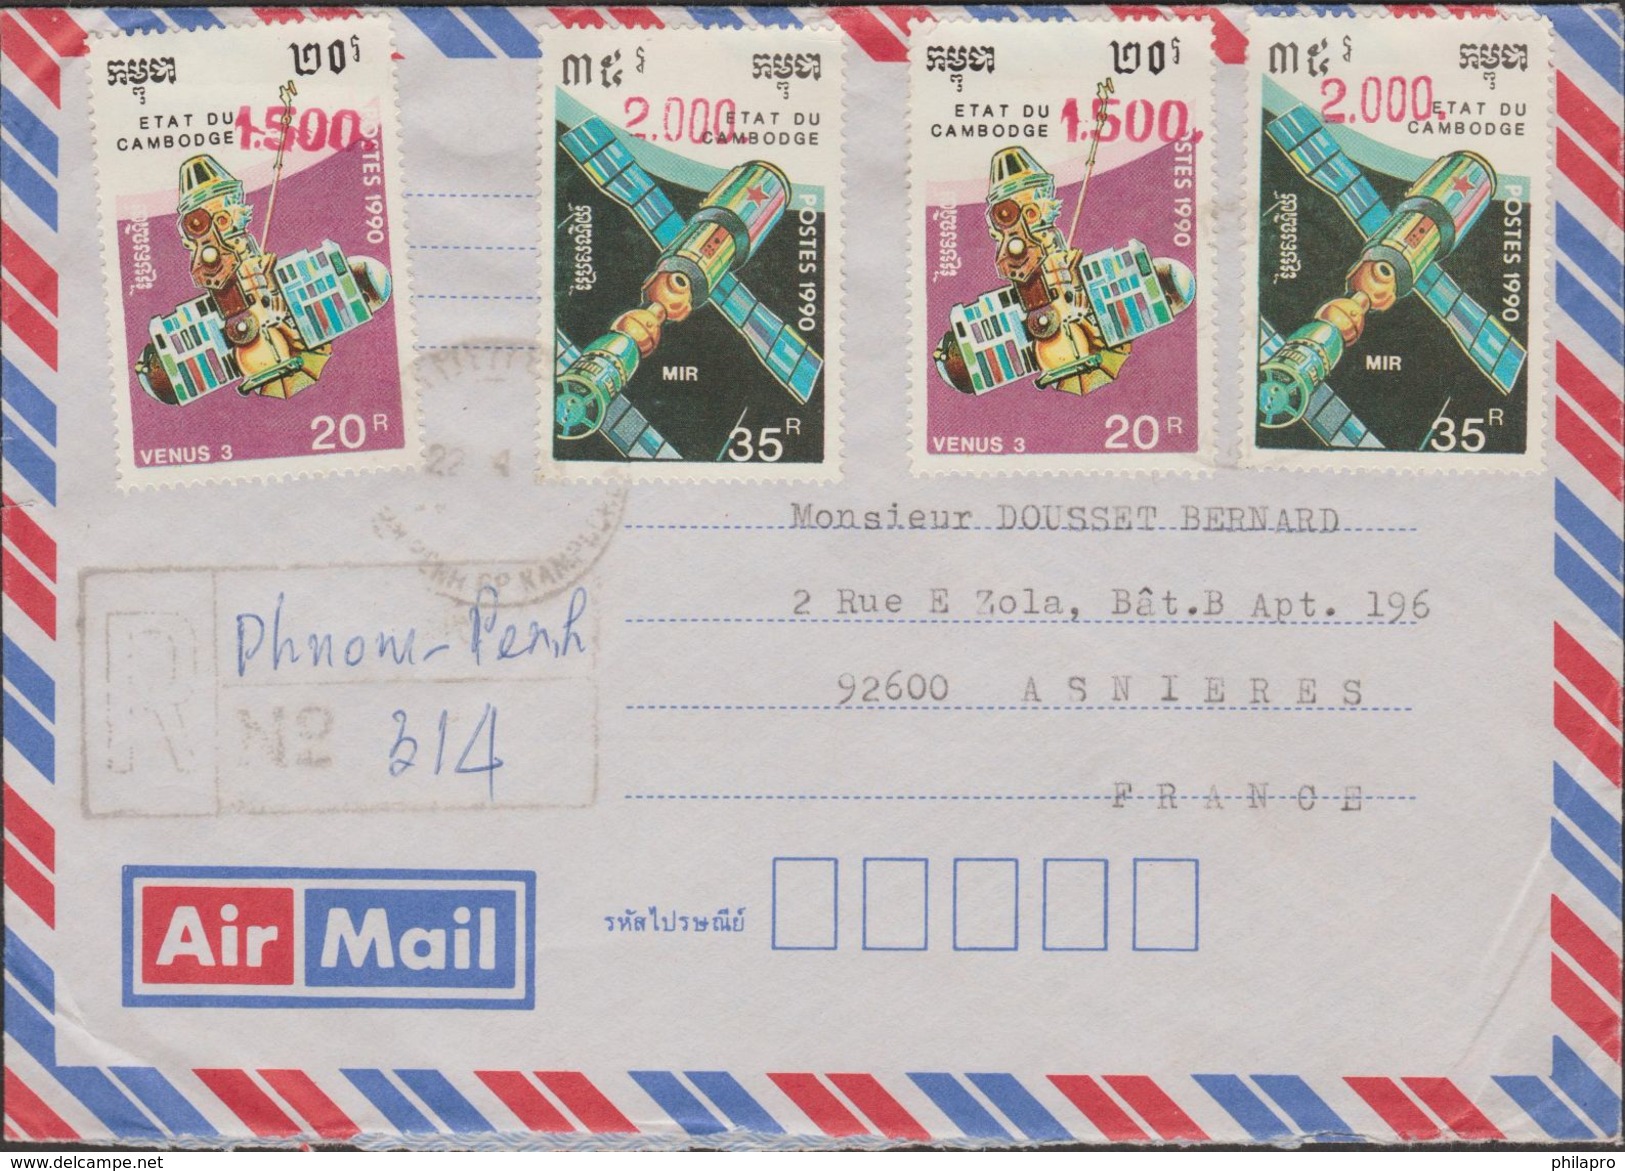 CAMBODGE / CAMBODIA  SPACE  Michel N°1228 &1229 Ovpt On Cover  Réf  H993  See 2 Scans  RARE - Asie